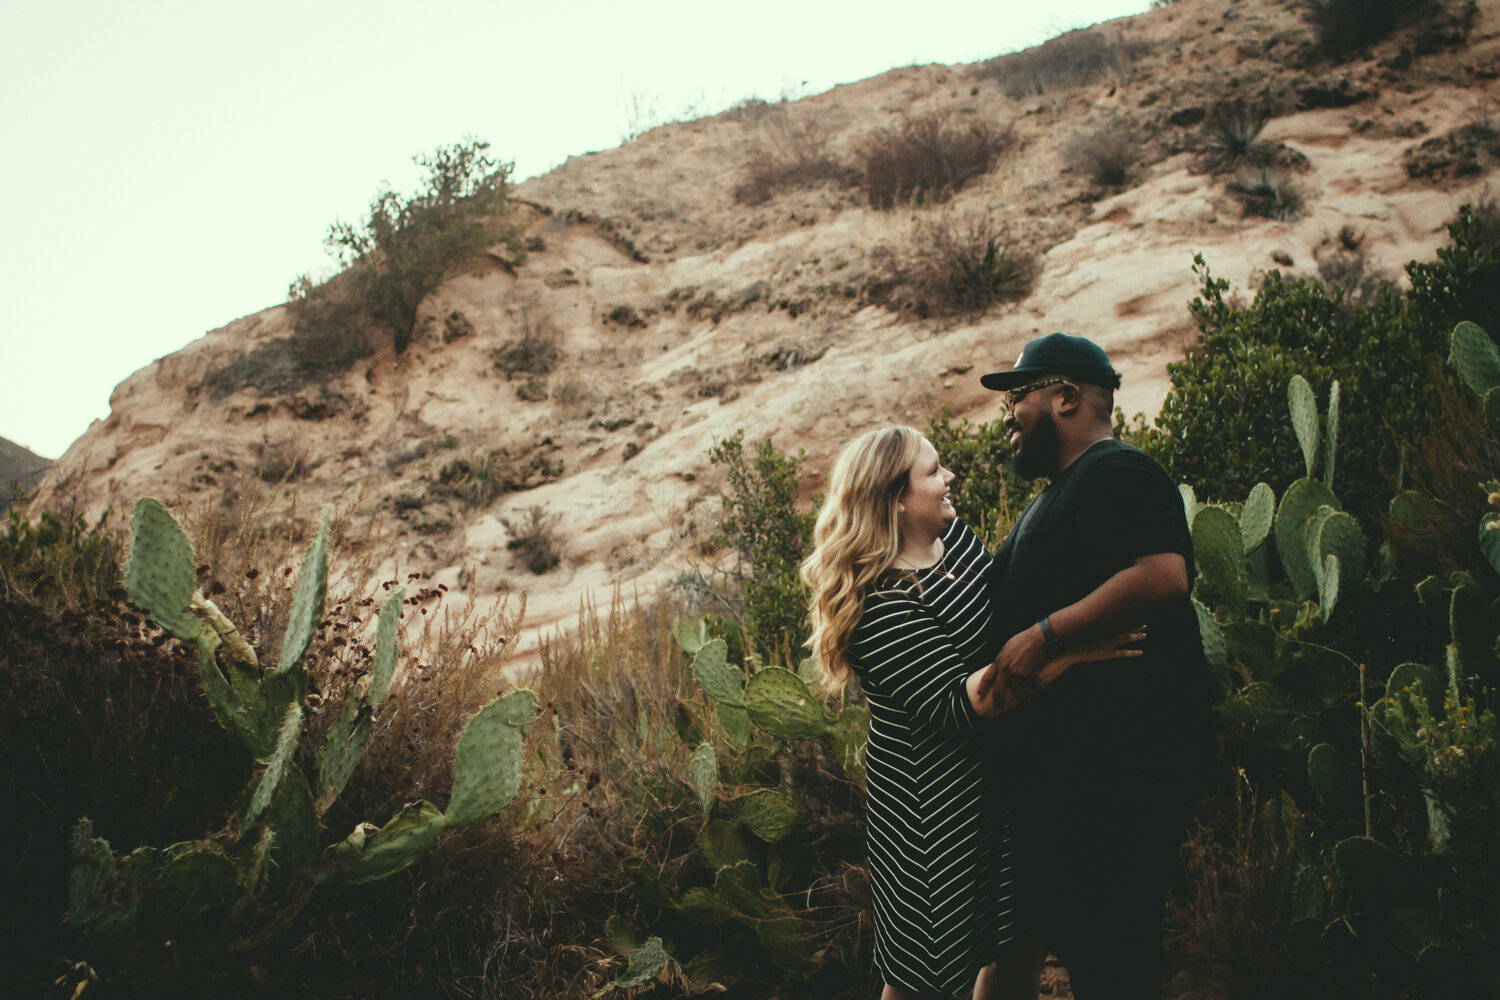 engagement engaged photography photographe marriage wedding photographer corse corsica california desert foothill ranch whiting lifestyle Anza Creative-33.jpg